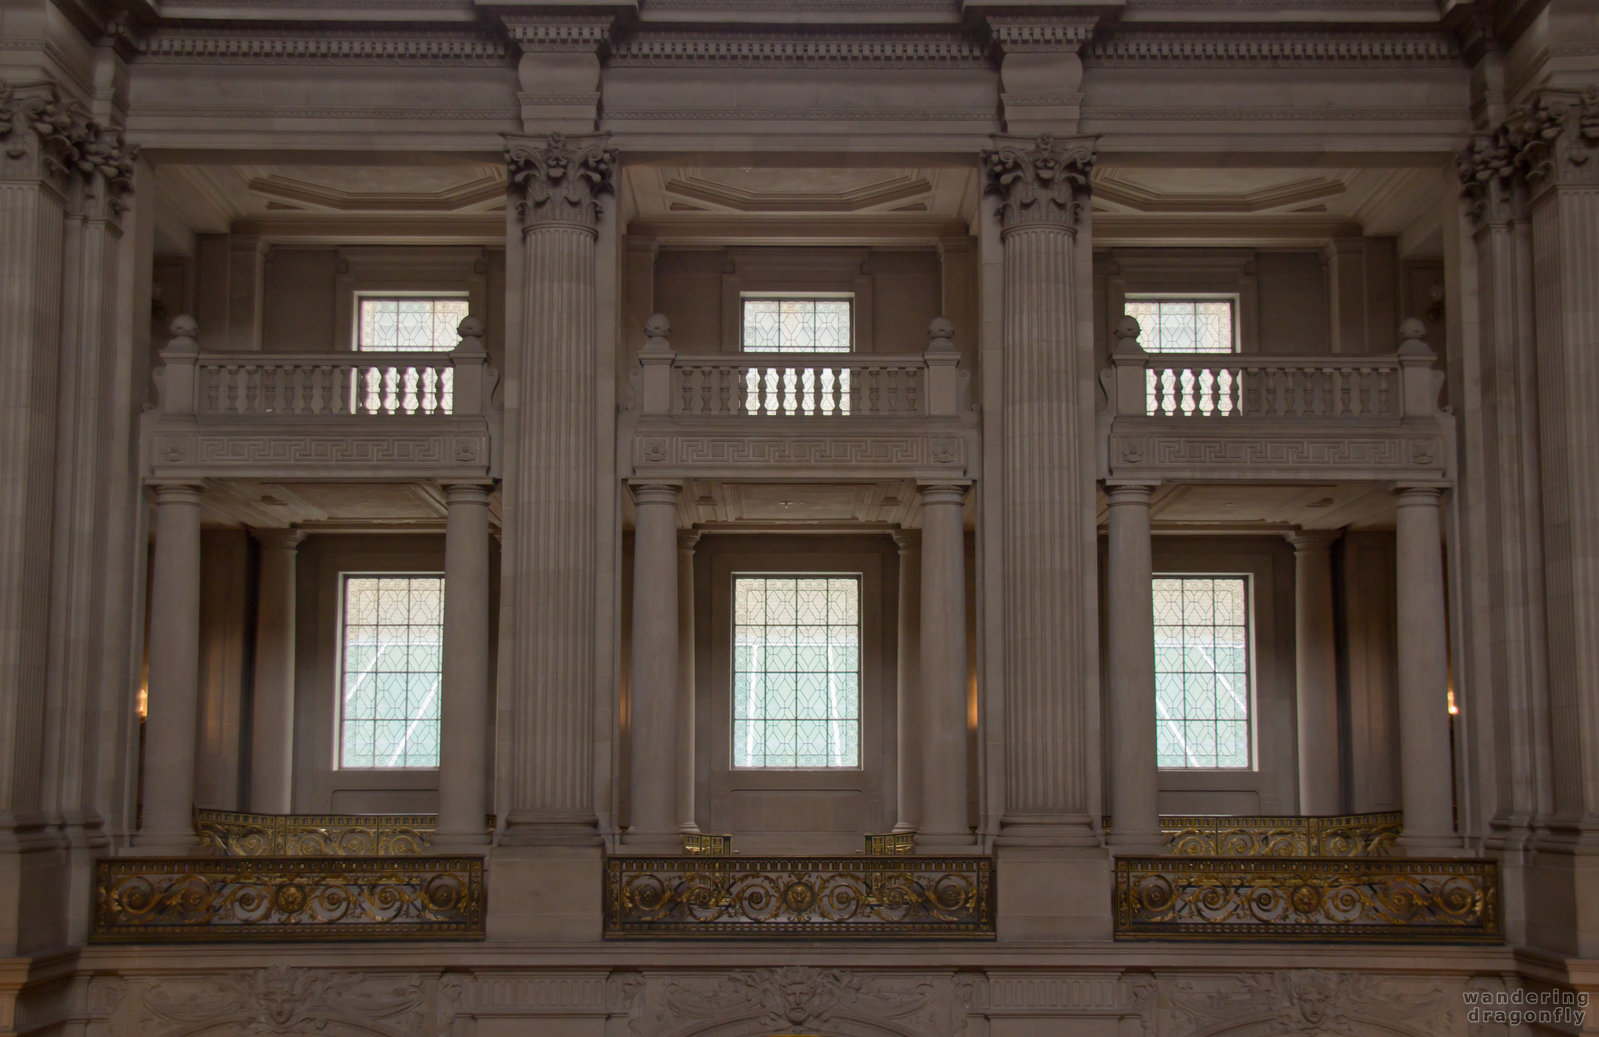 Galleries and windows in the City Hall -- pillar, window